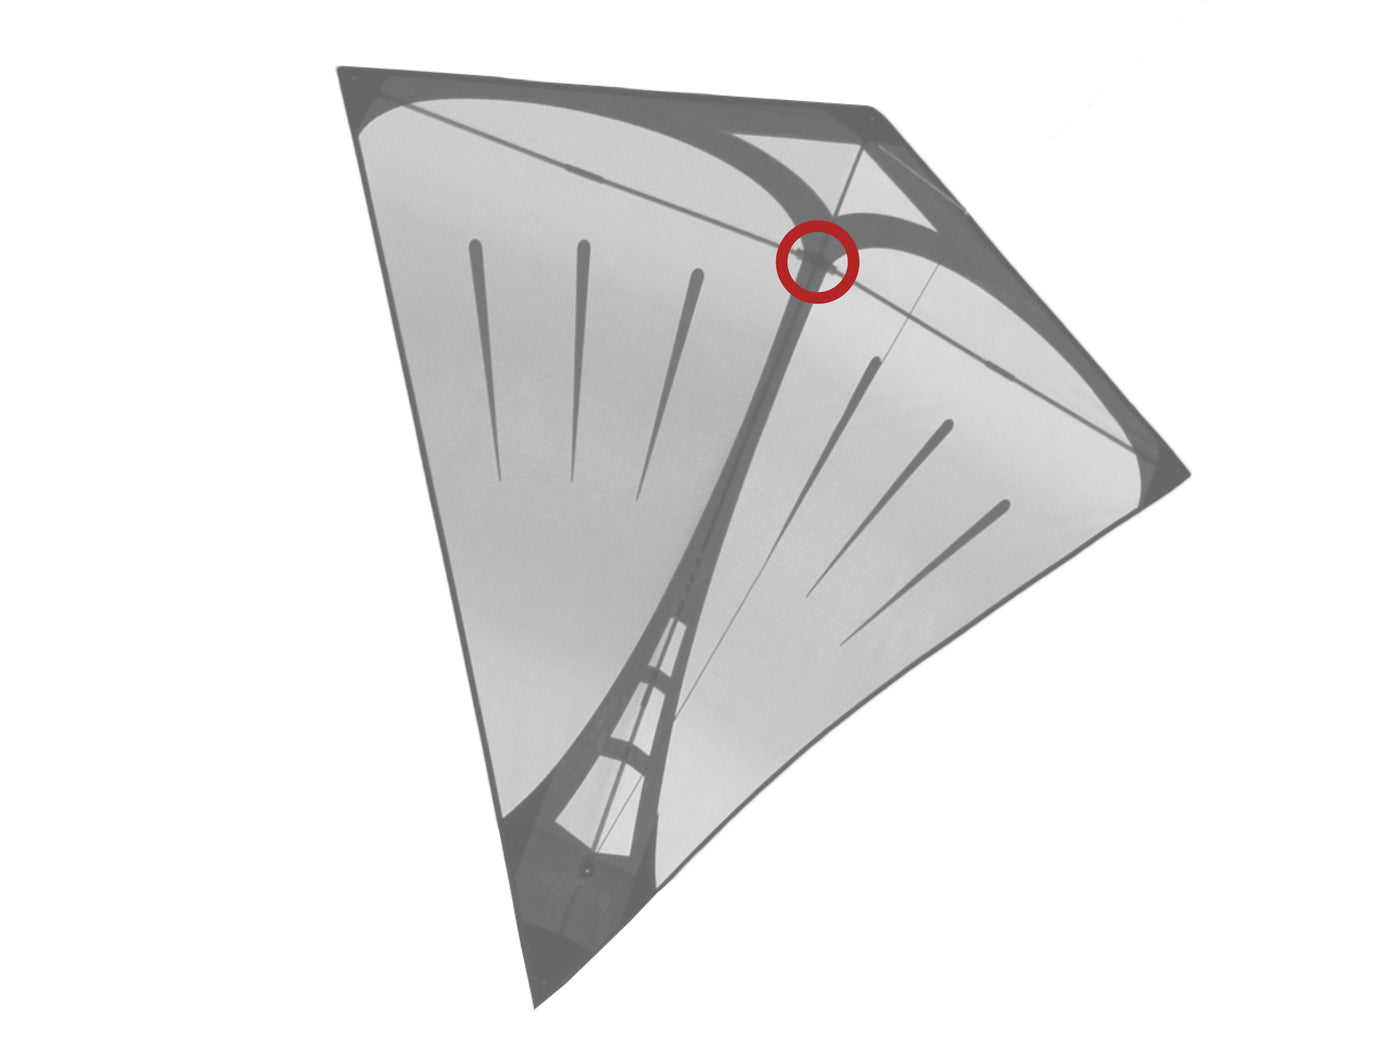 Diagram showing location of the Pica Center T on the kite.